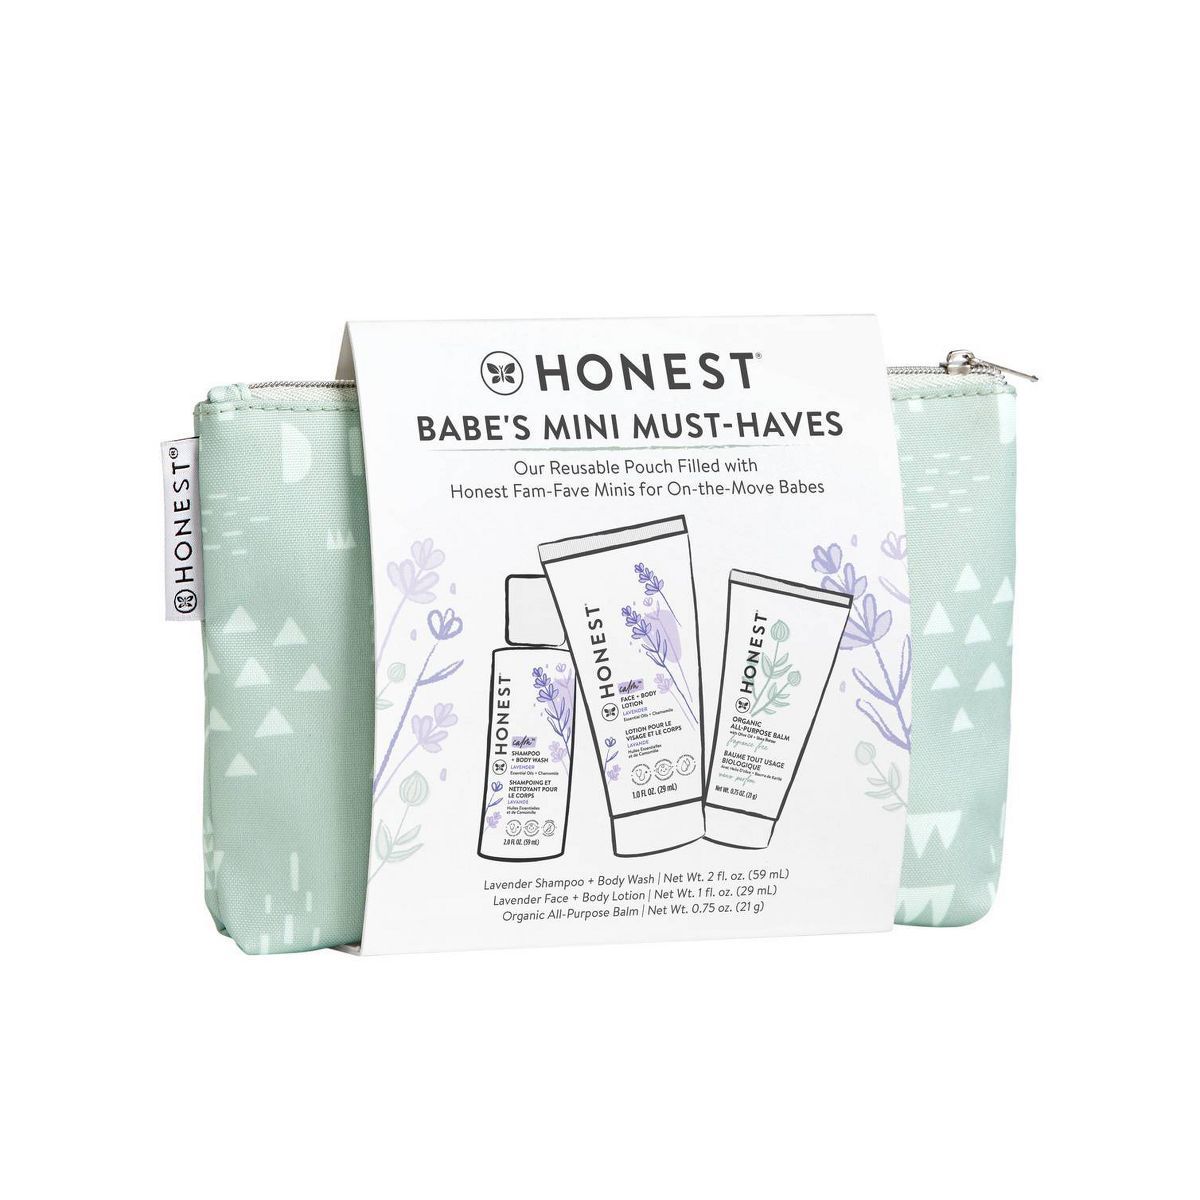 The Honest Company Babe's Mini Must-Haves Gift Set - 3pk | Target